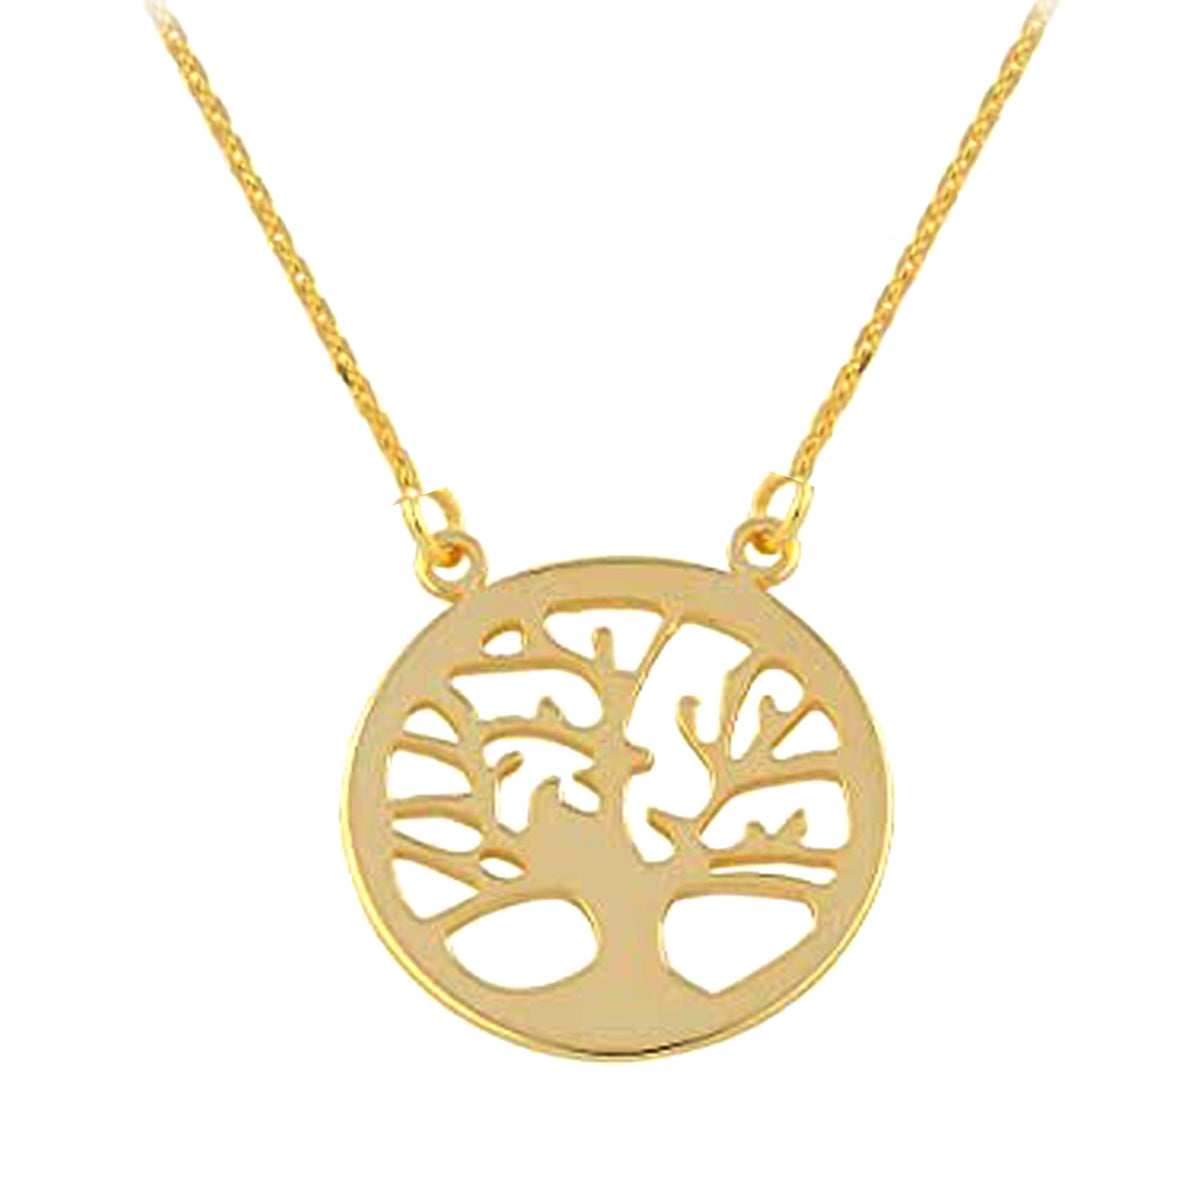 10K Yellow Gold Sideways Tree Of Life Pendant Necklace, 18" fine designer jewelry for men and women